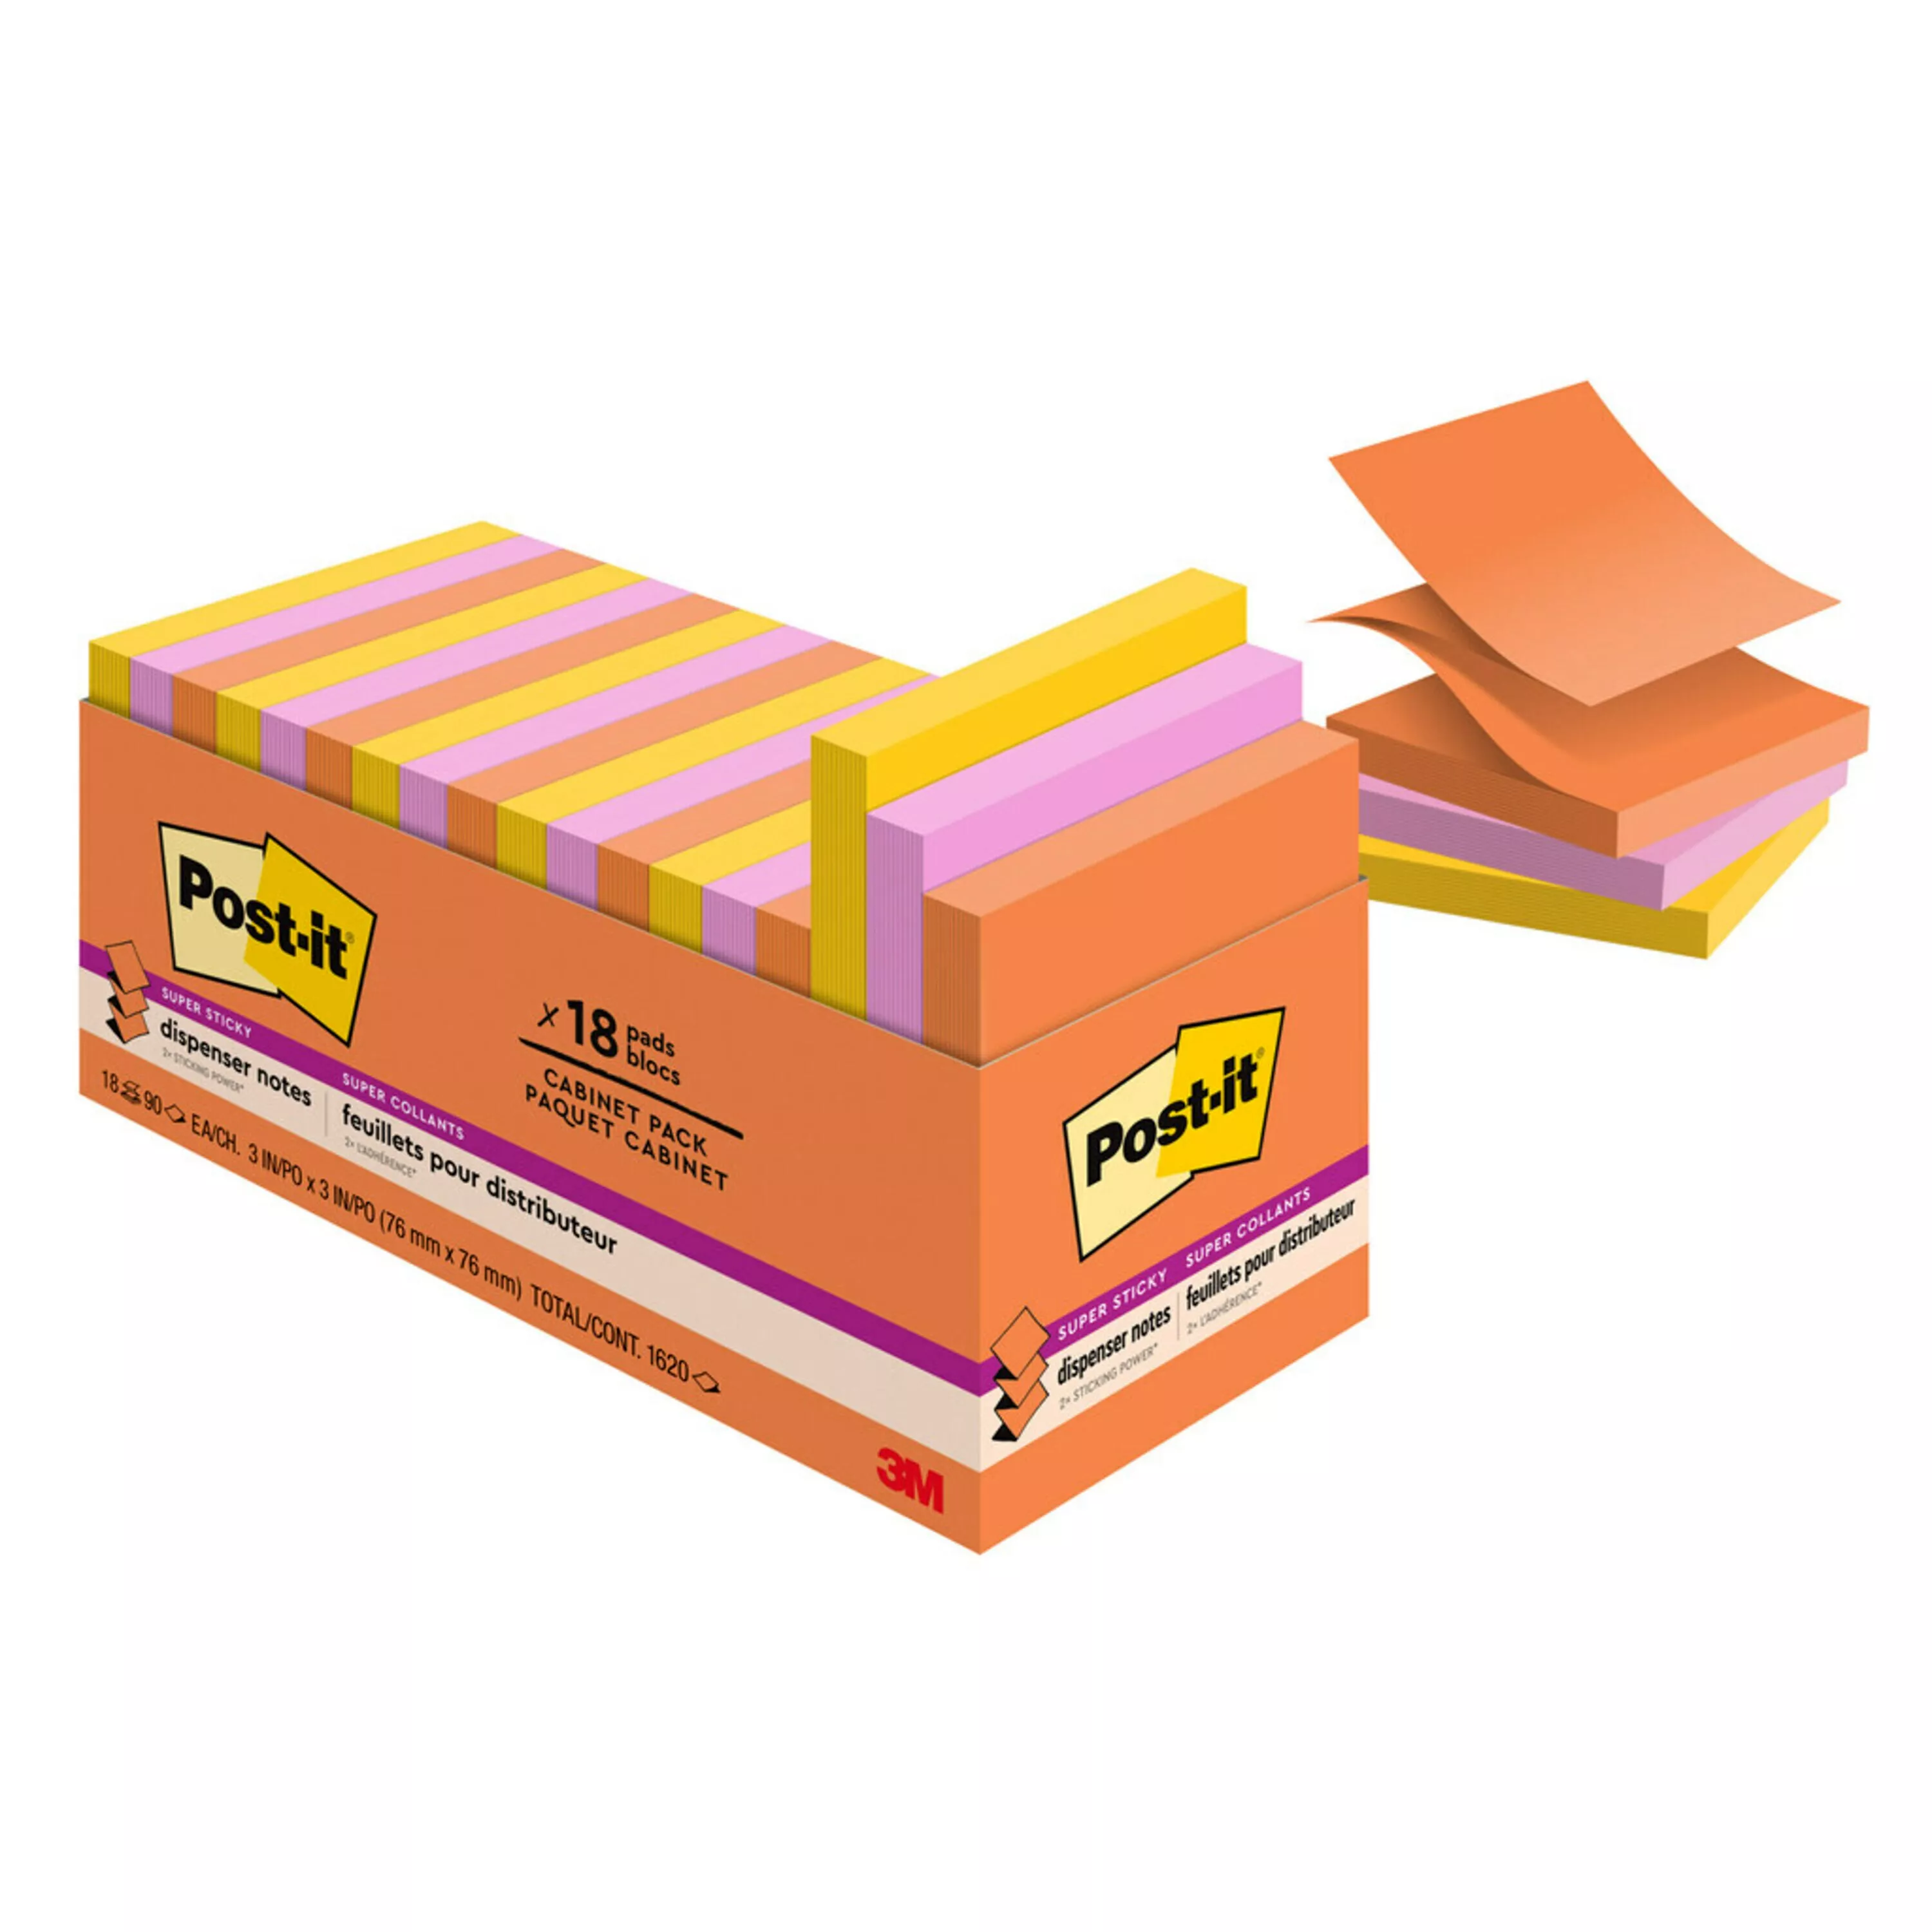 Post-it® Dispenser Pop-up Notes R330-18SSAUCP, 3 in x 3 in, 18 pads, Energy Boost Collection